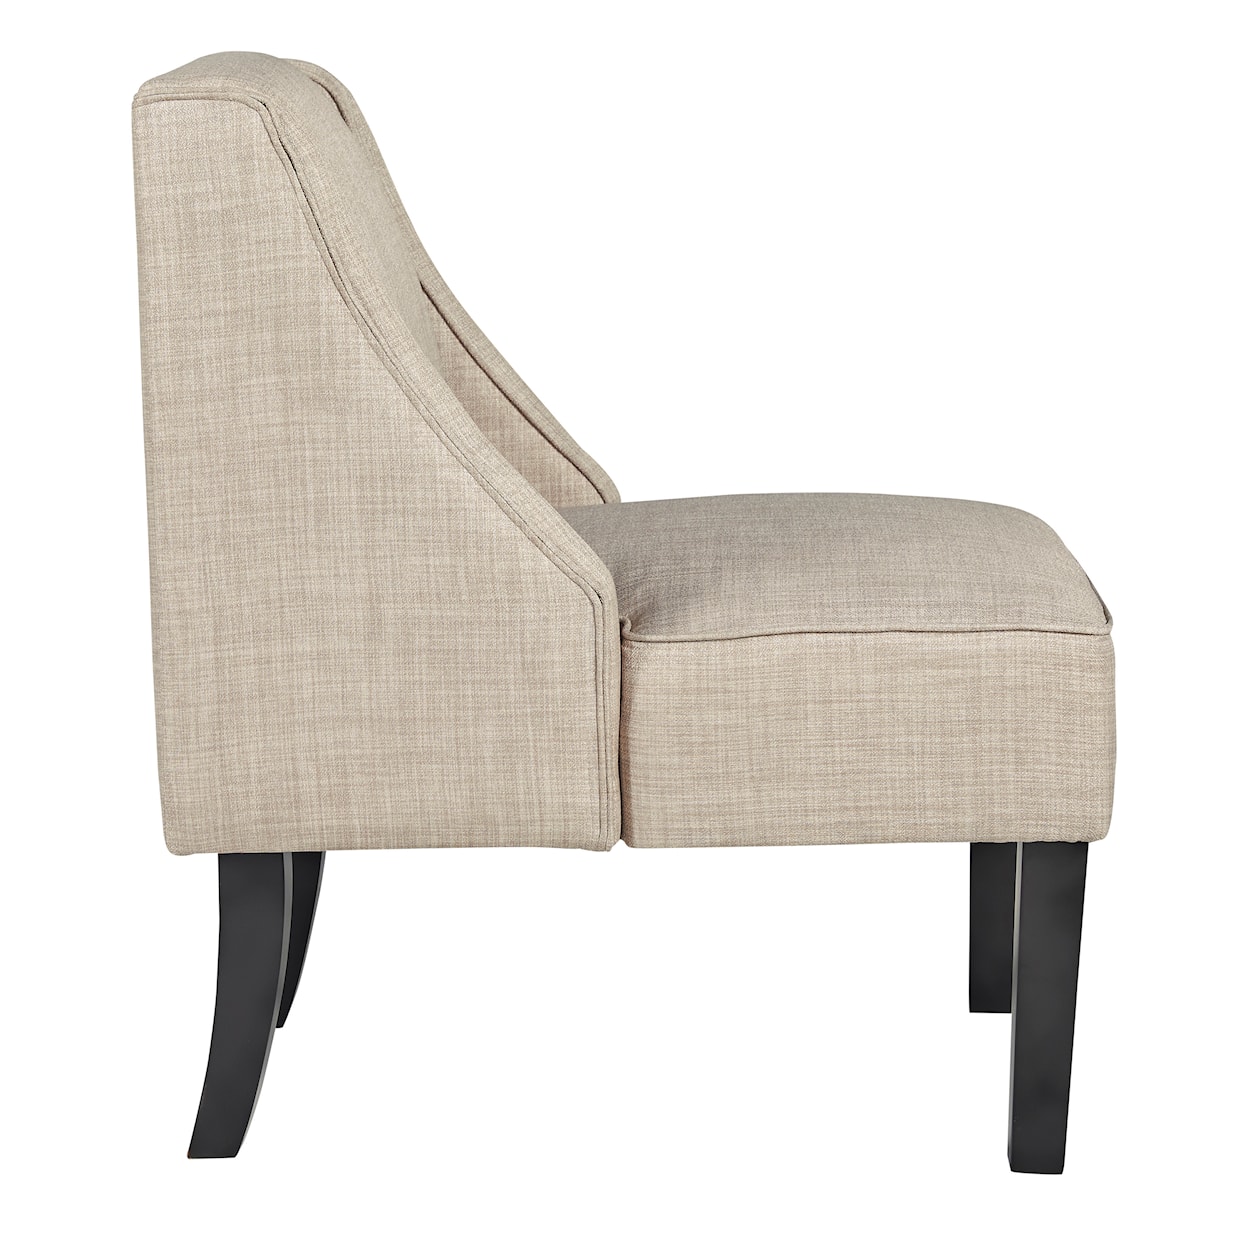 Signature Design by Ashley Furniture Janesley Accent Chair